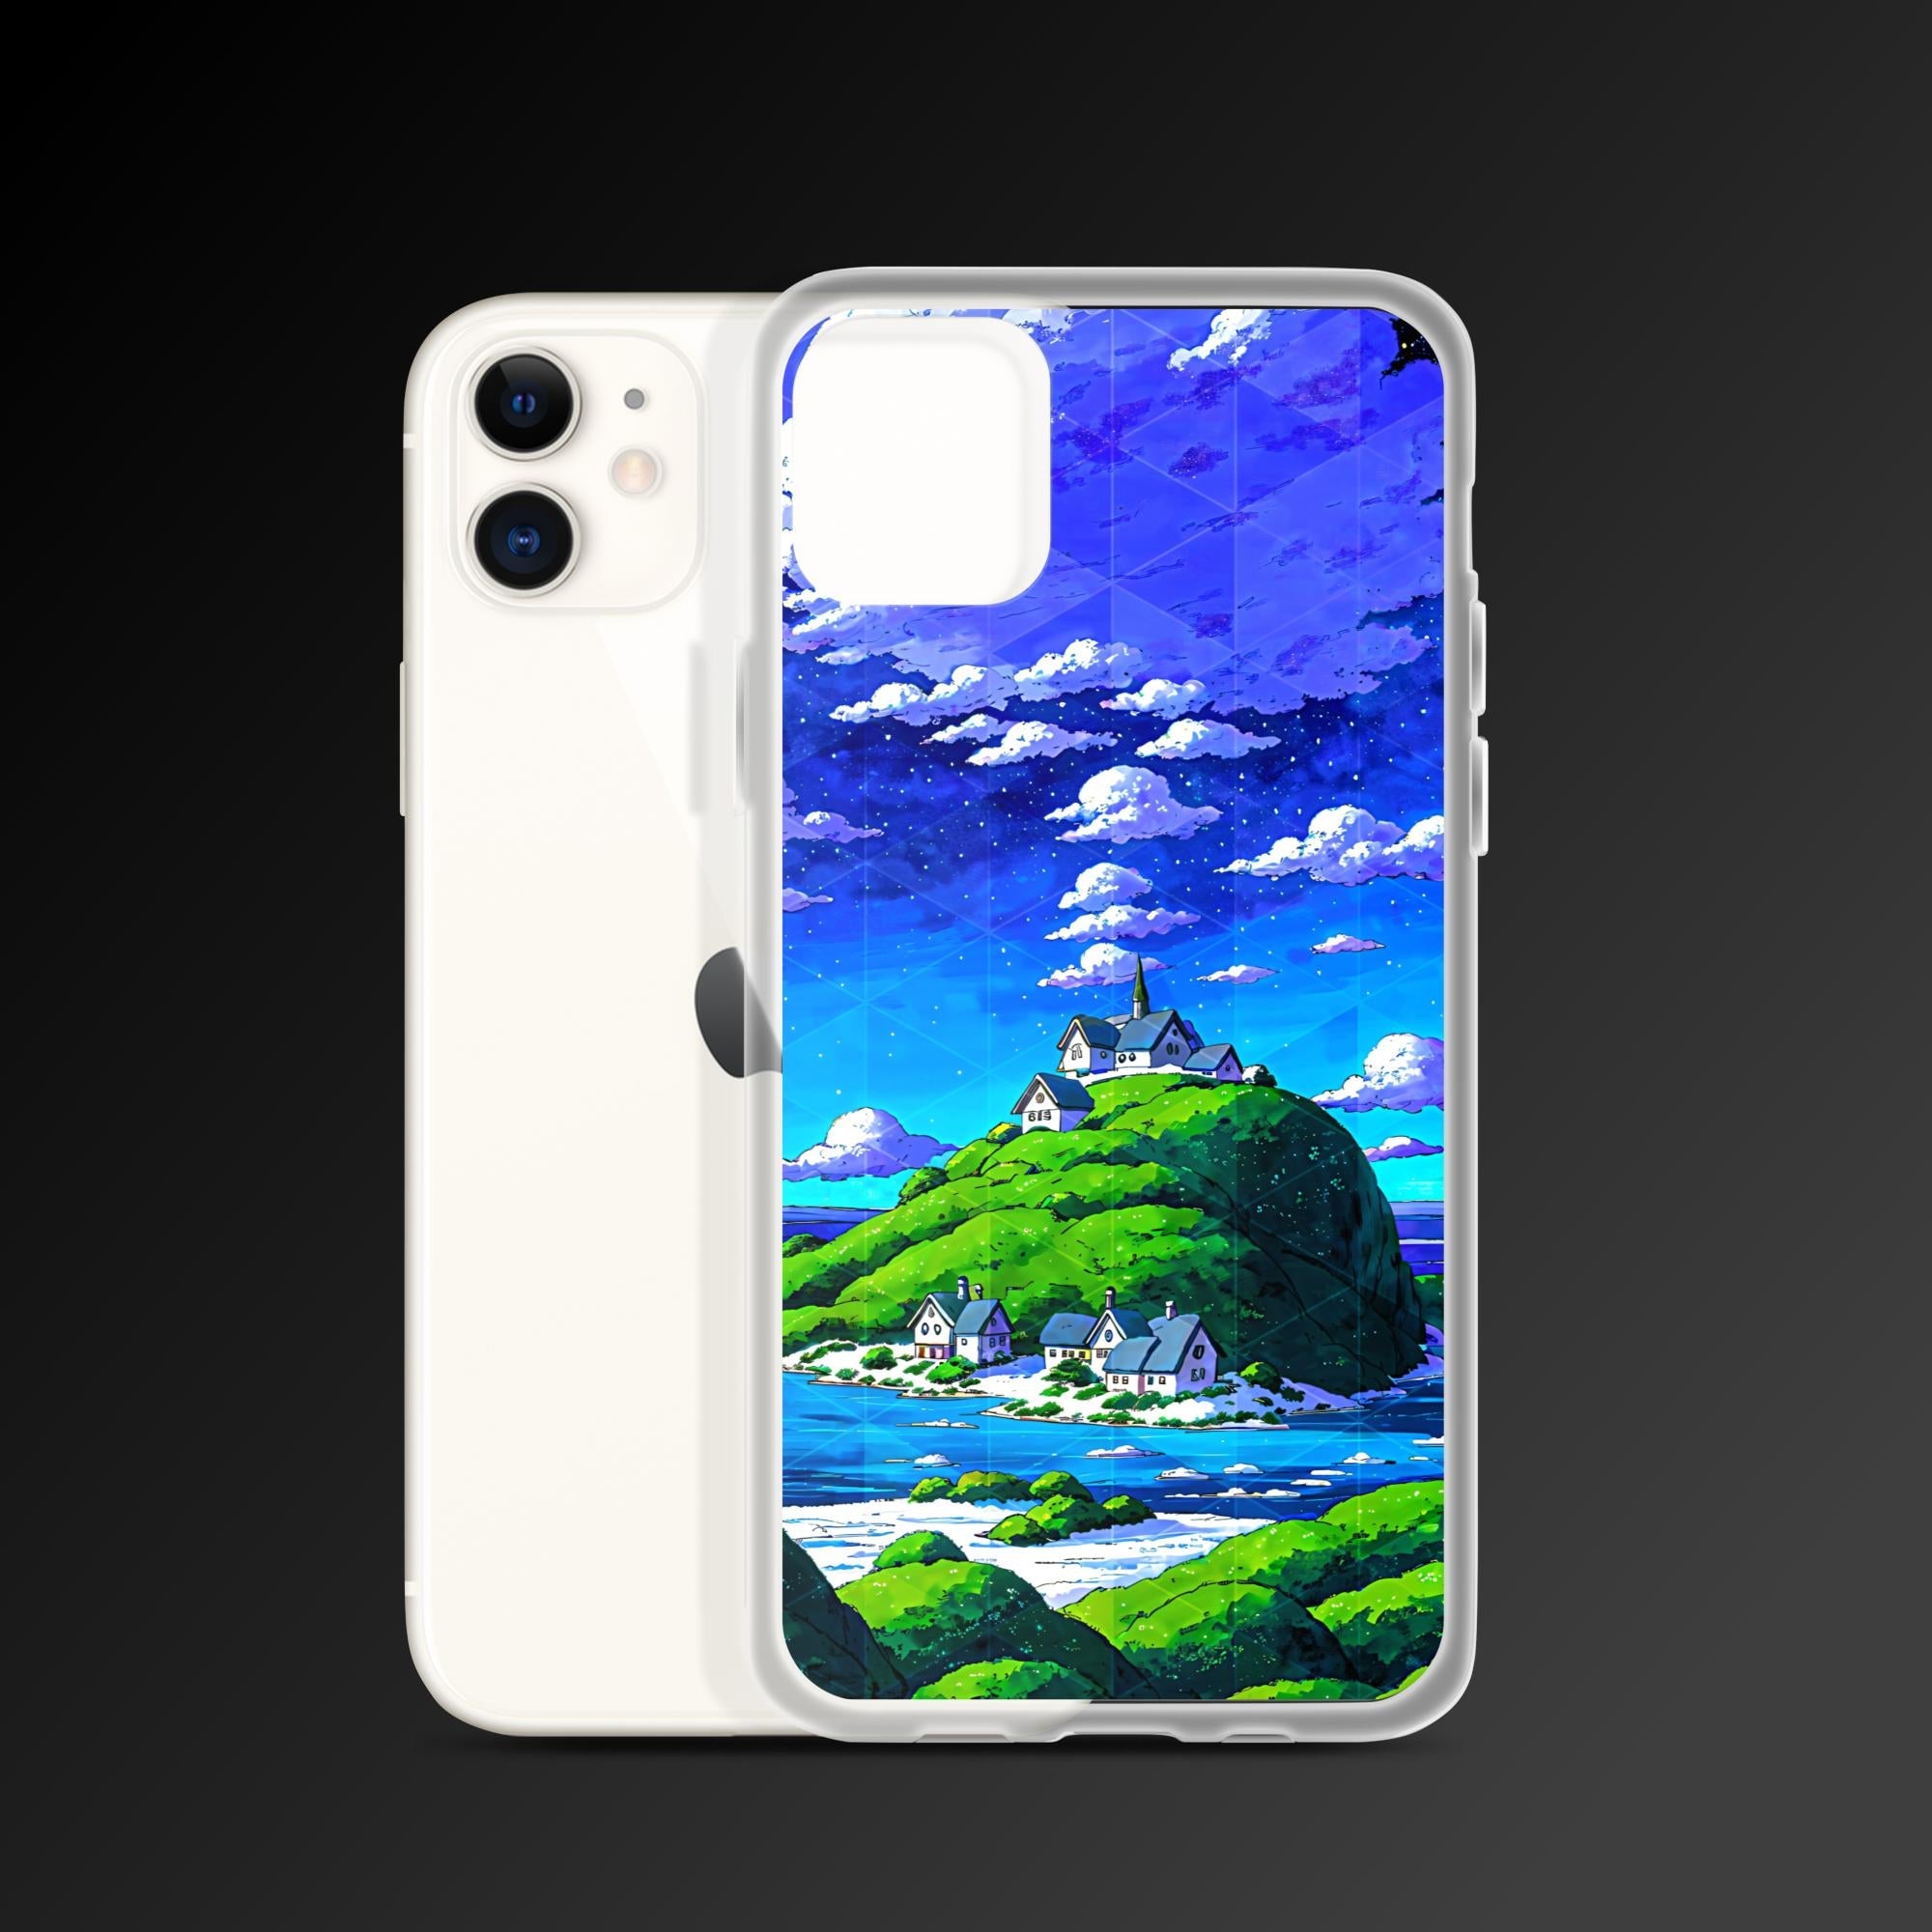 "Blissful world" clear iphone case - Clear iphone case - Ever colorful